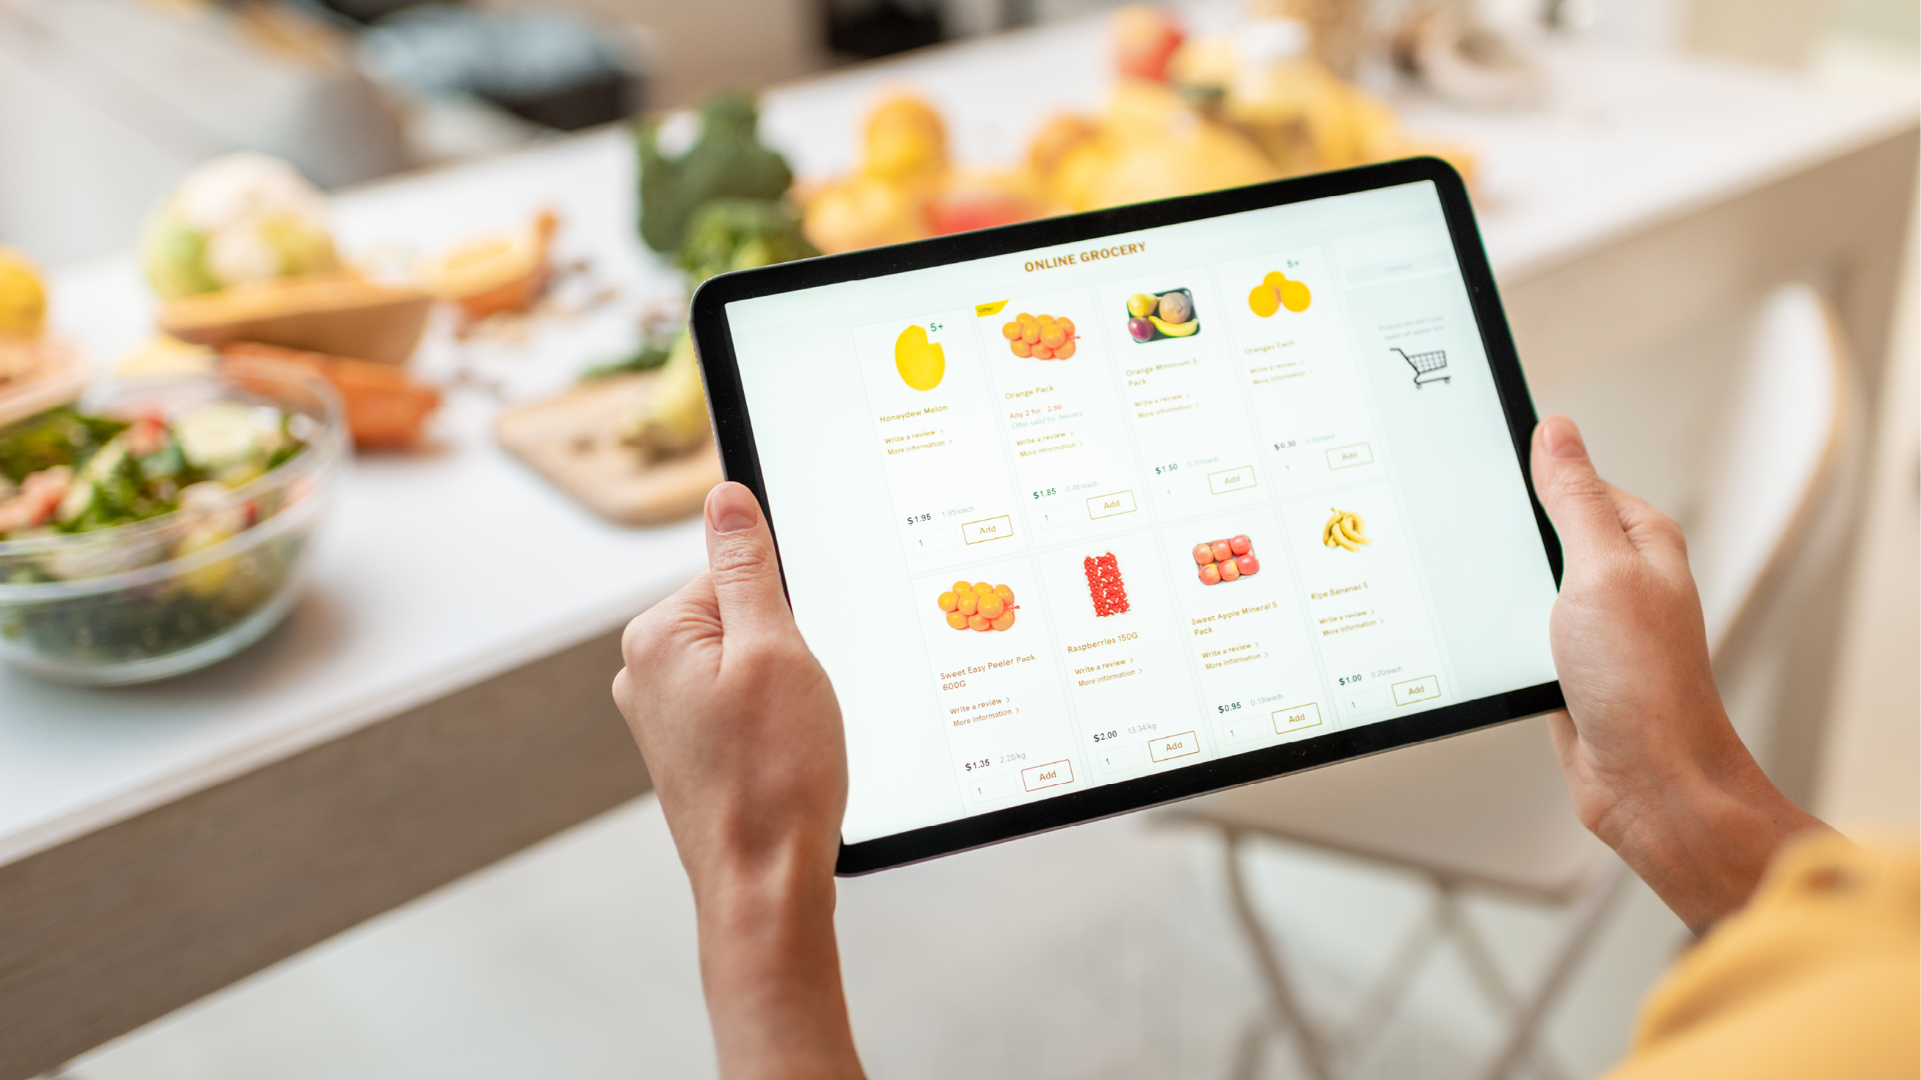 Food delivery - ordering groceries on a tablet